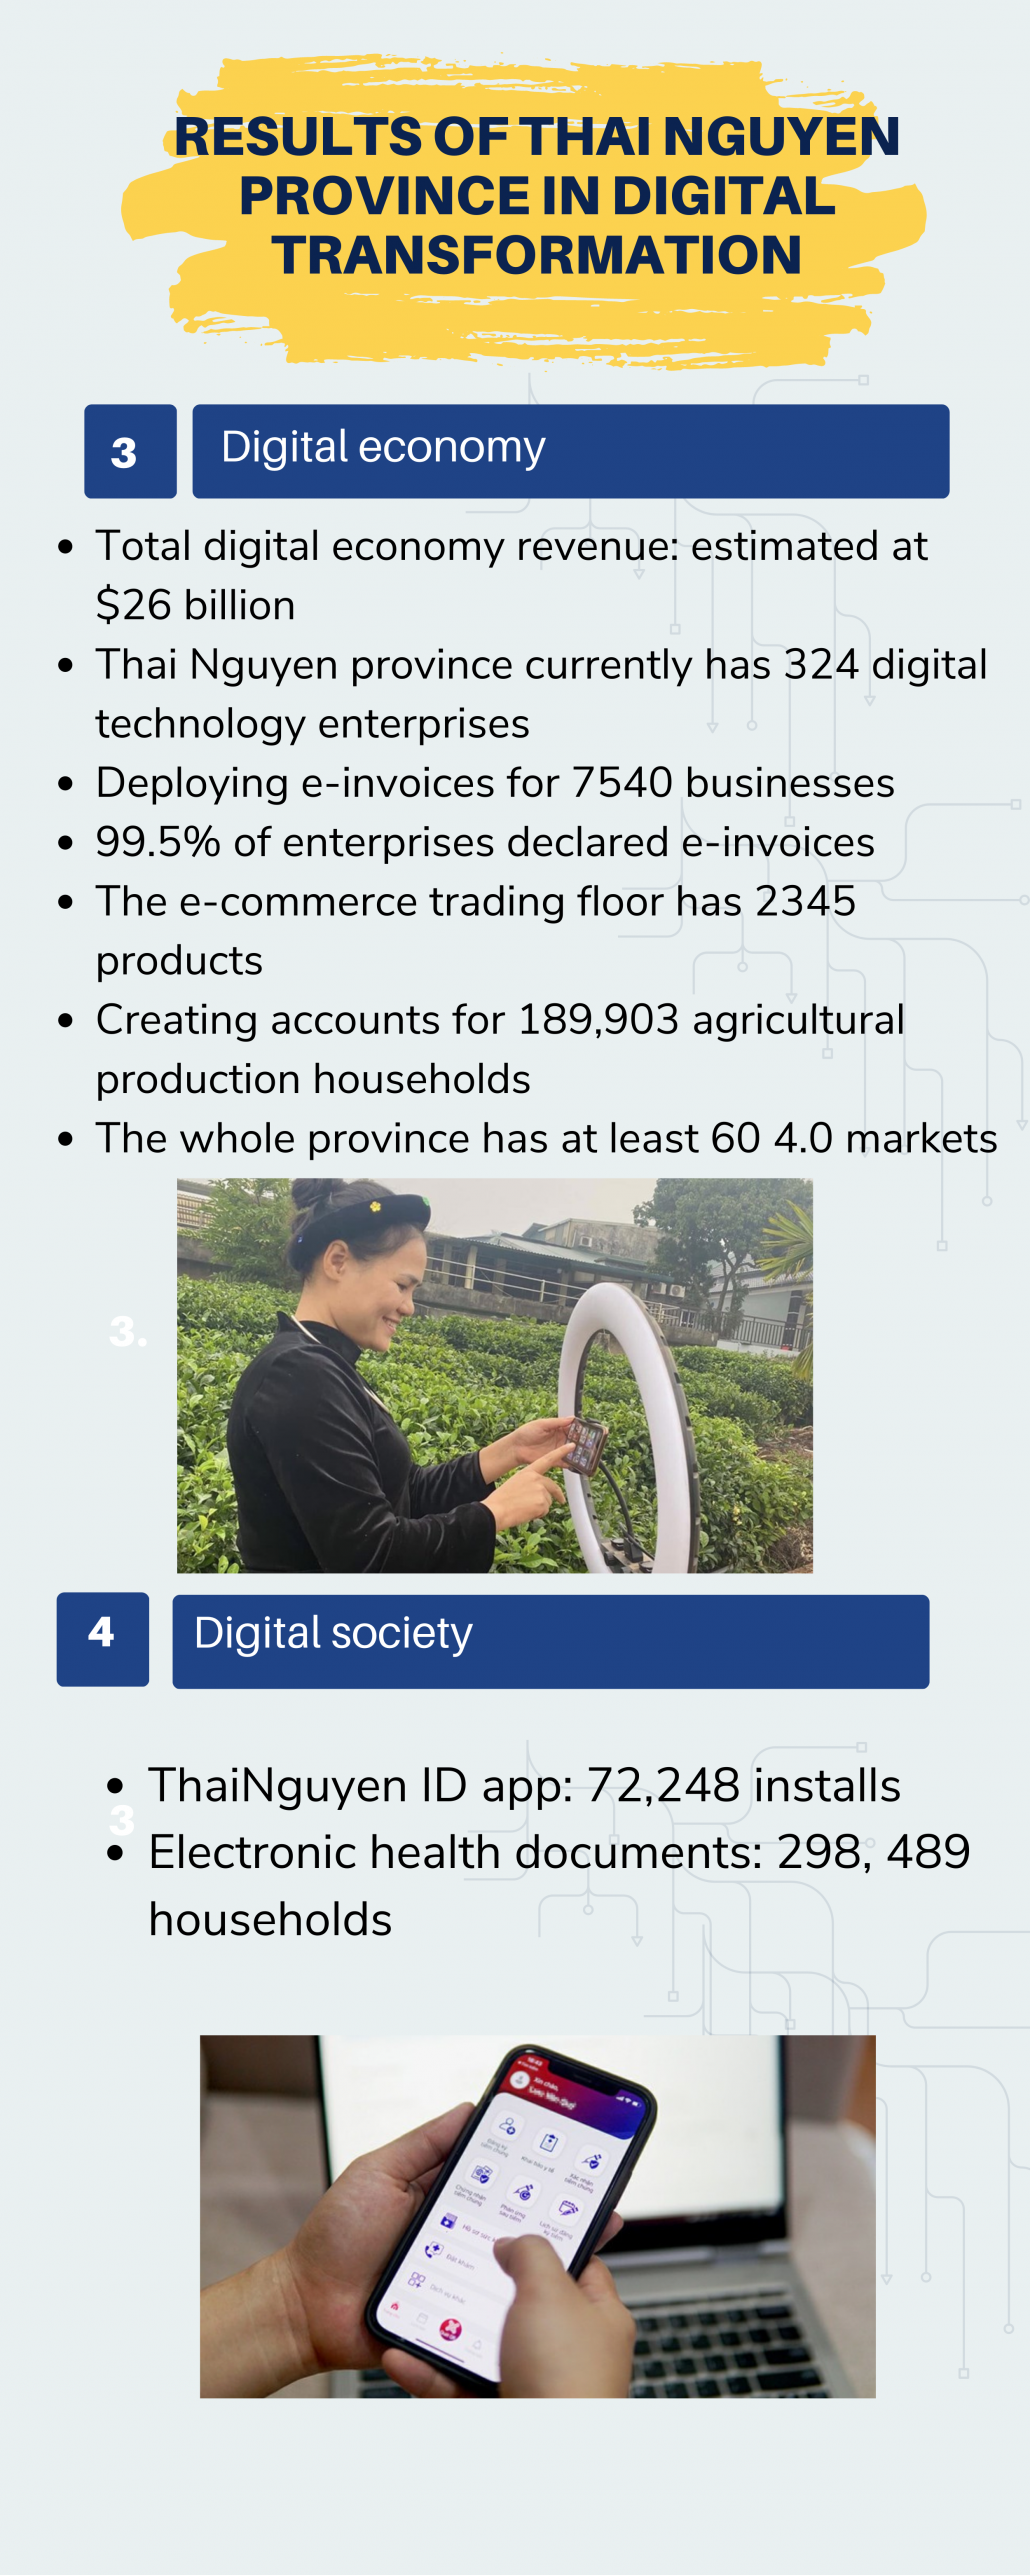 Results of Thai Nguyen province in digital transformation